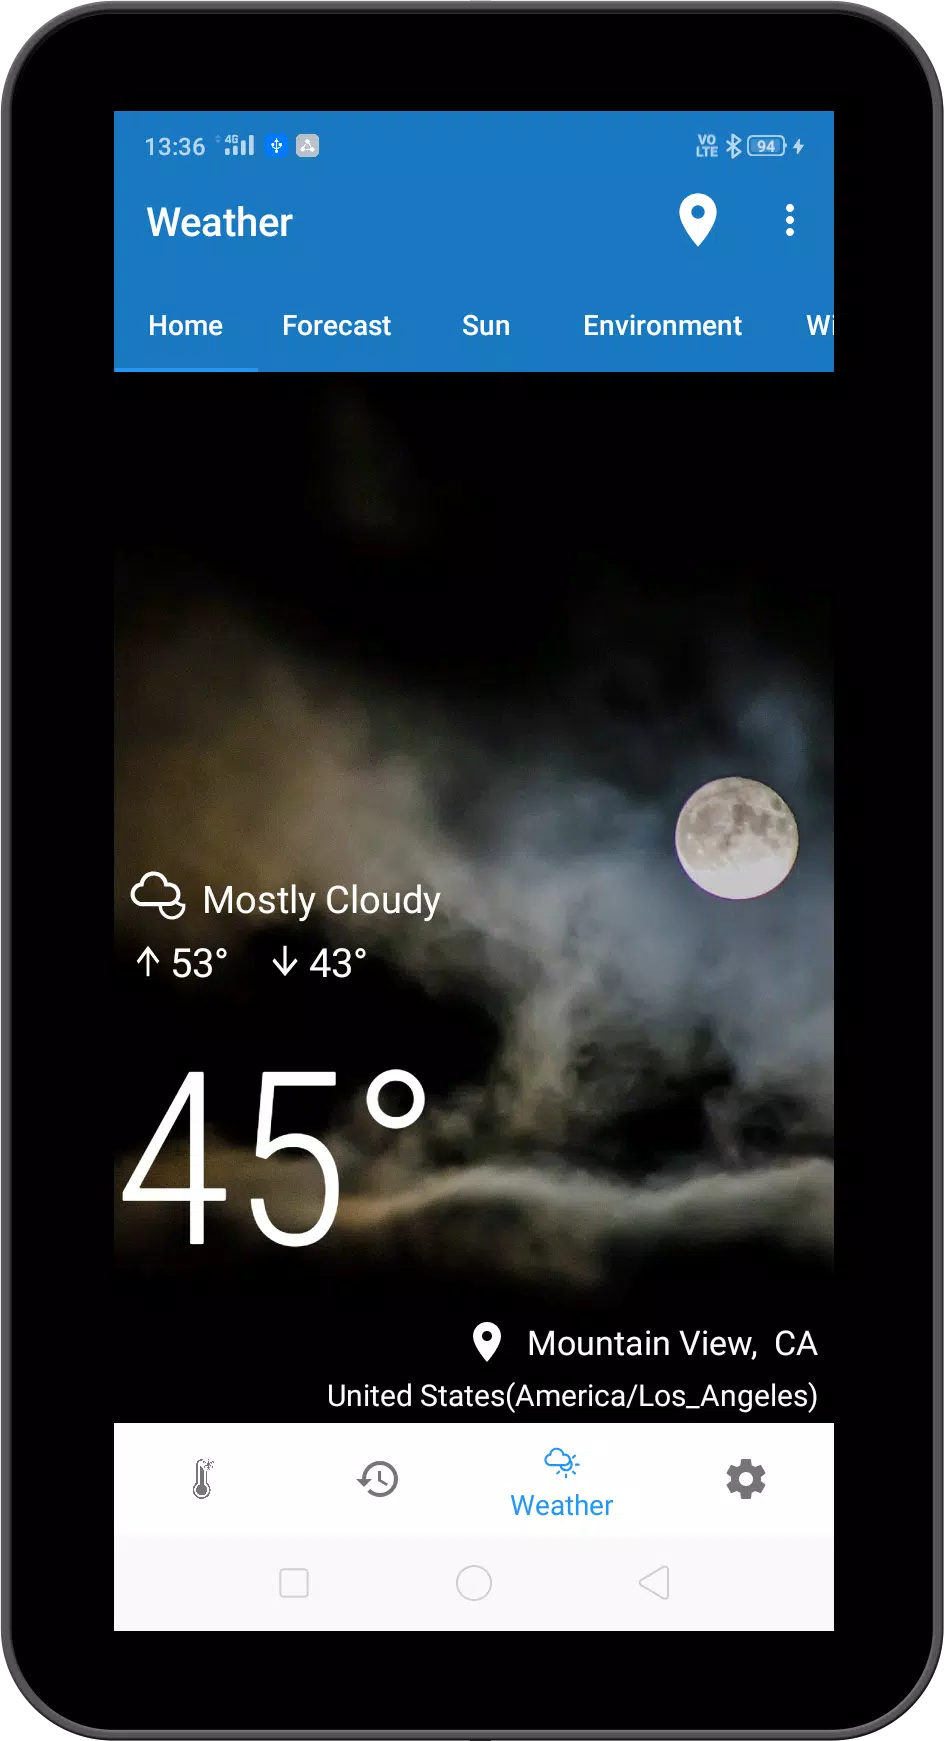 Thermometer Room Temperature for Android - Download